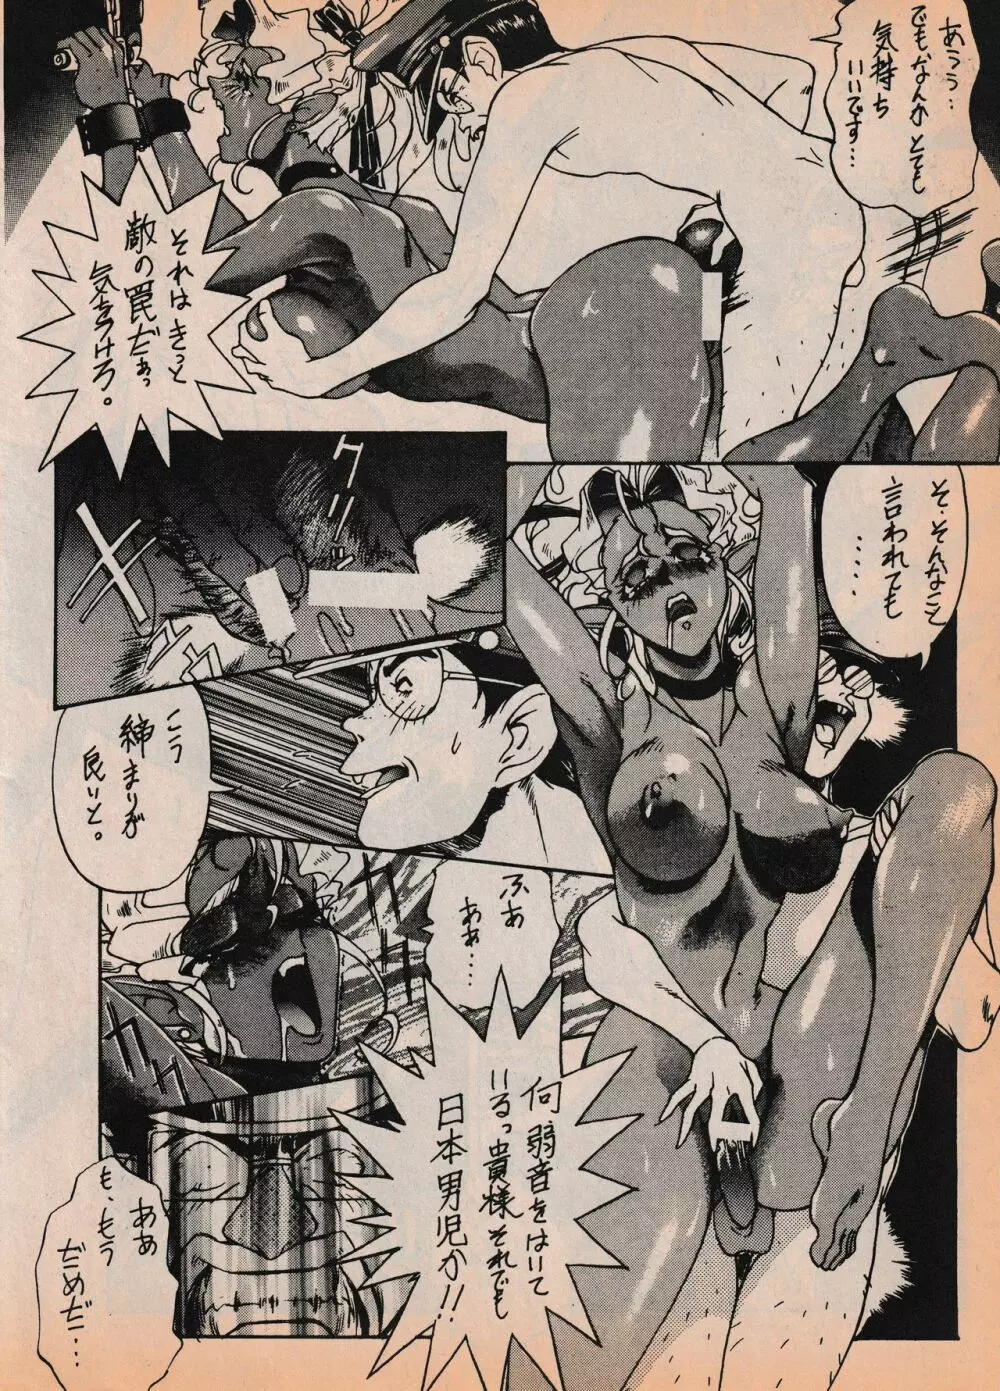 Sailor X vol. 7 - The Kama Sutra Of Pain Page.91